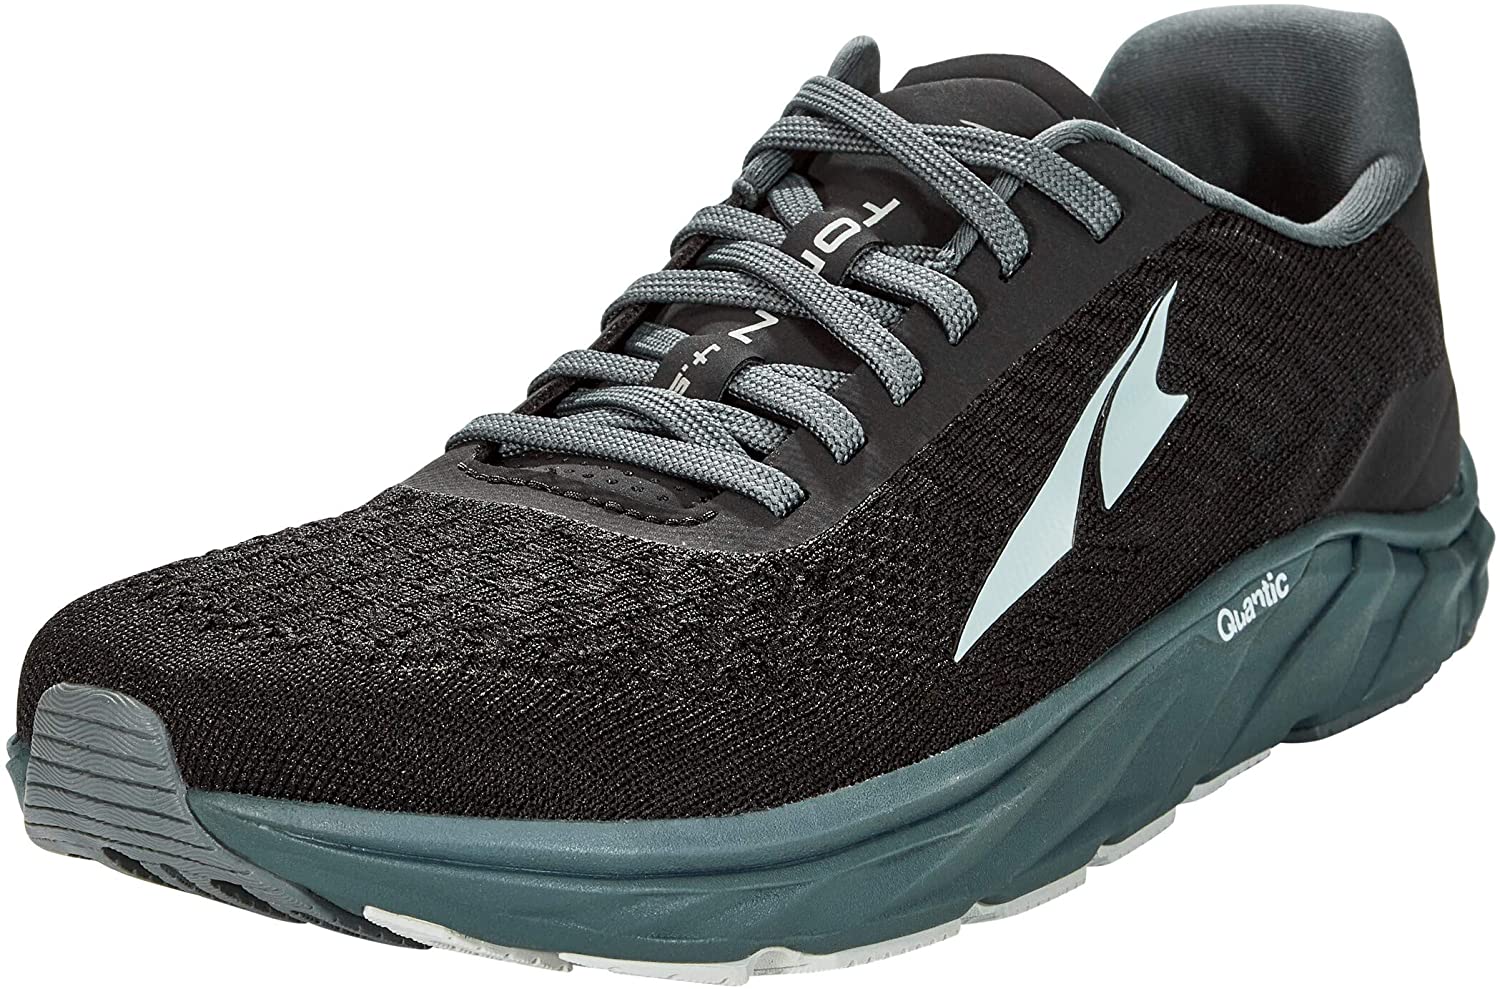 Altra Men's Torin 4.5 Plush Road Running Shoe in Black Steel from the side